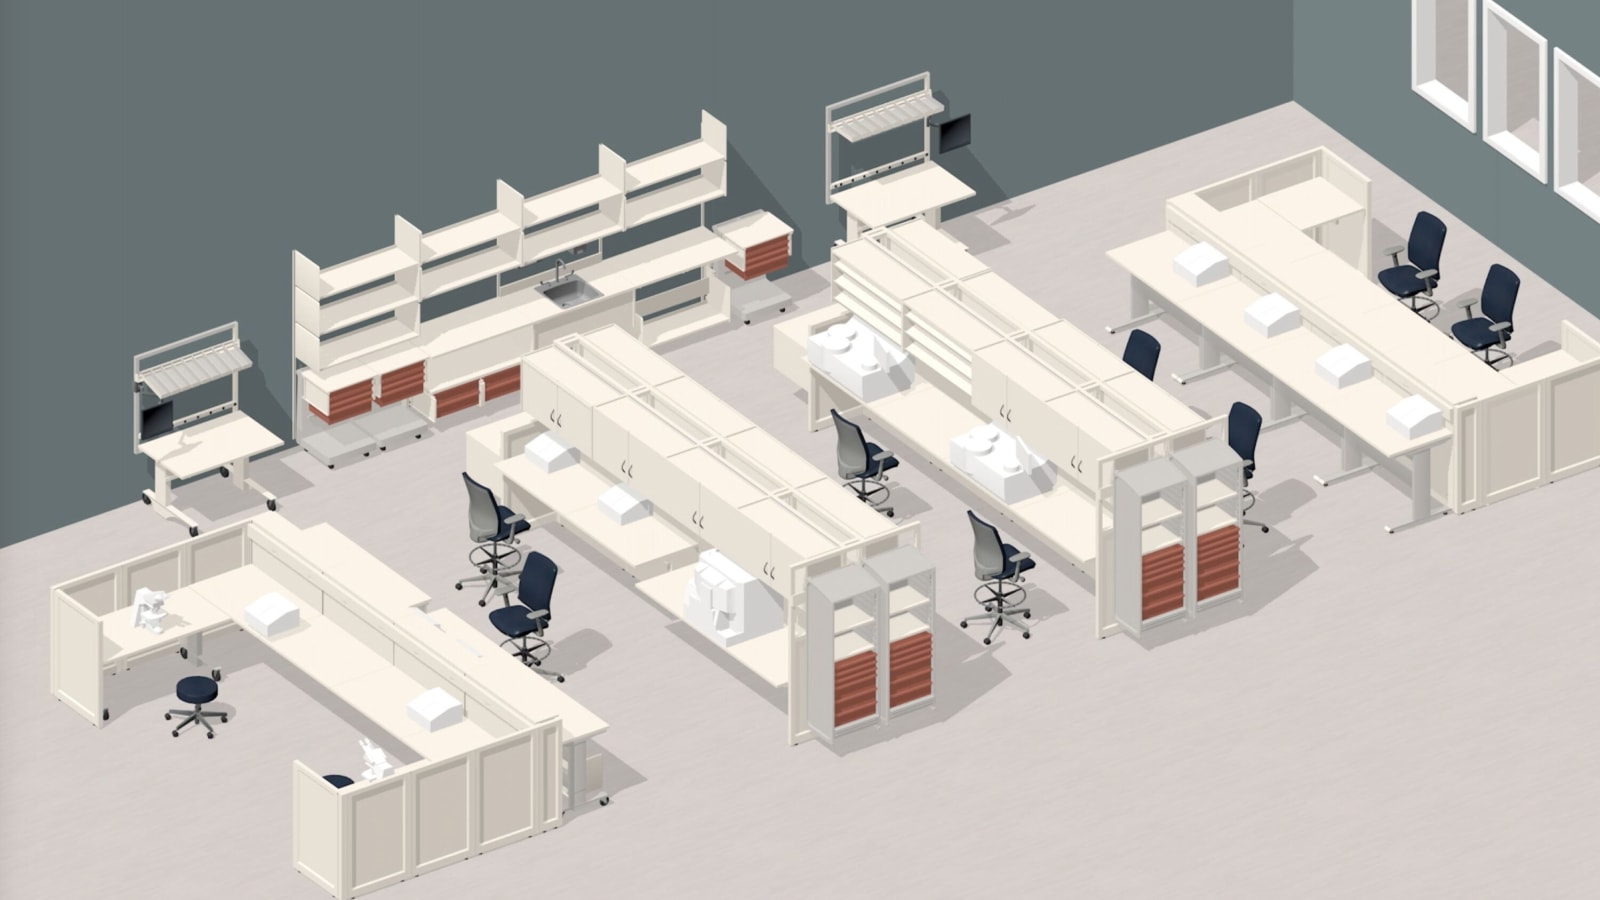 Illustrated image of a laboratory with Co/Struc System and Verus Chairs and Stools. 